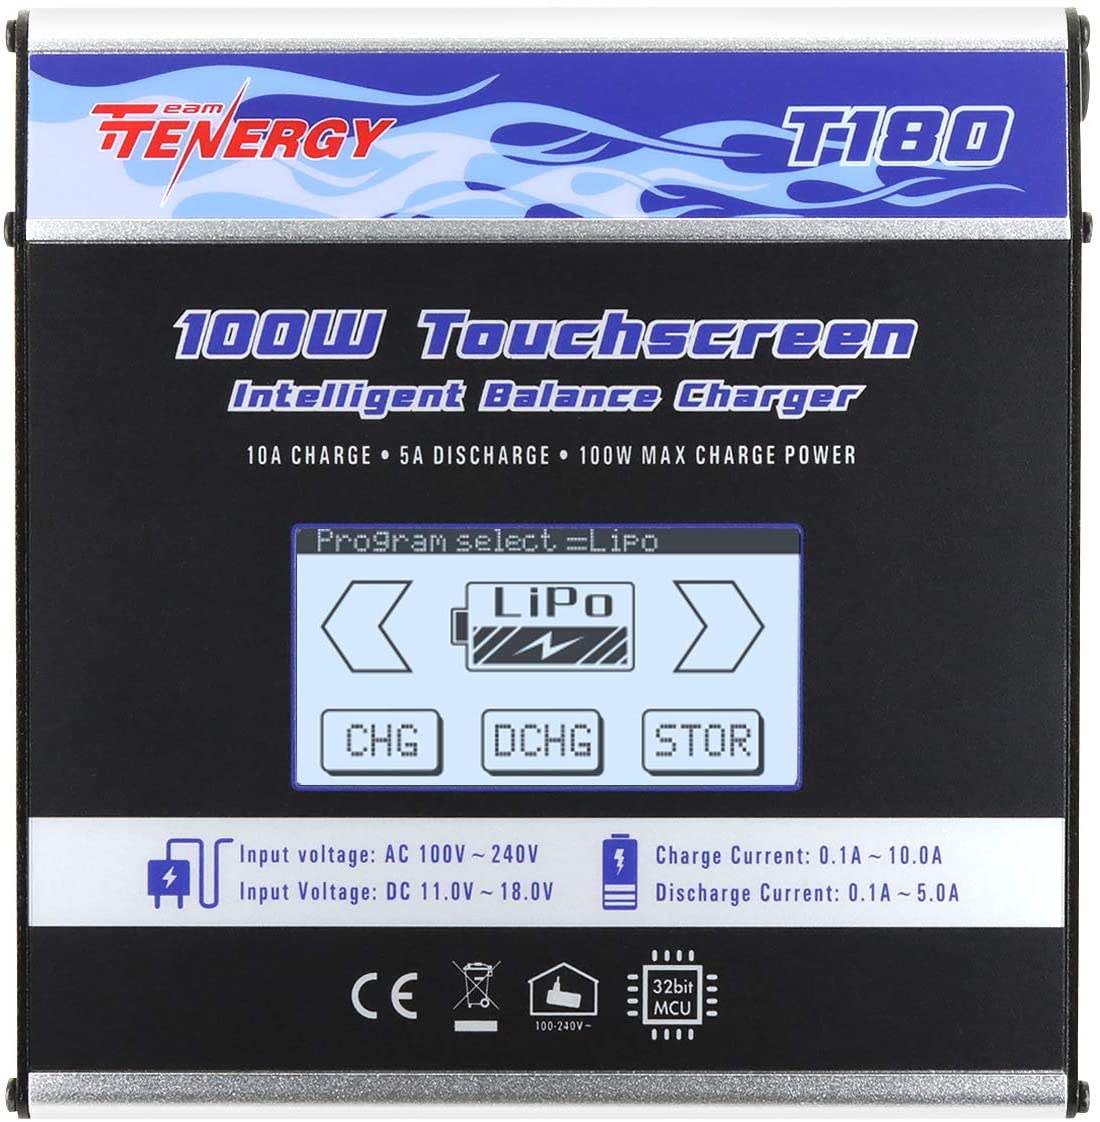 Tenergy T180 100W Balance Battery Charger Discharger LiPo NiMH NiCd LiFe $69.99